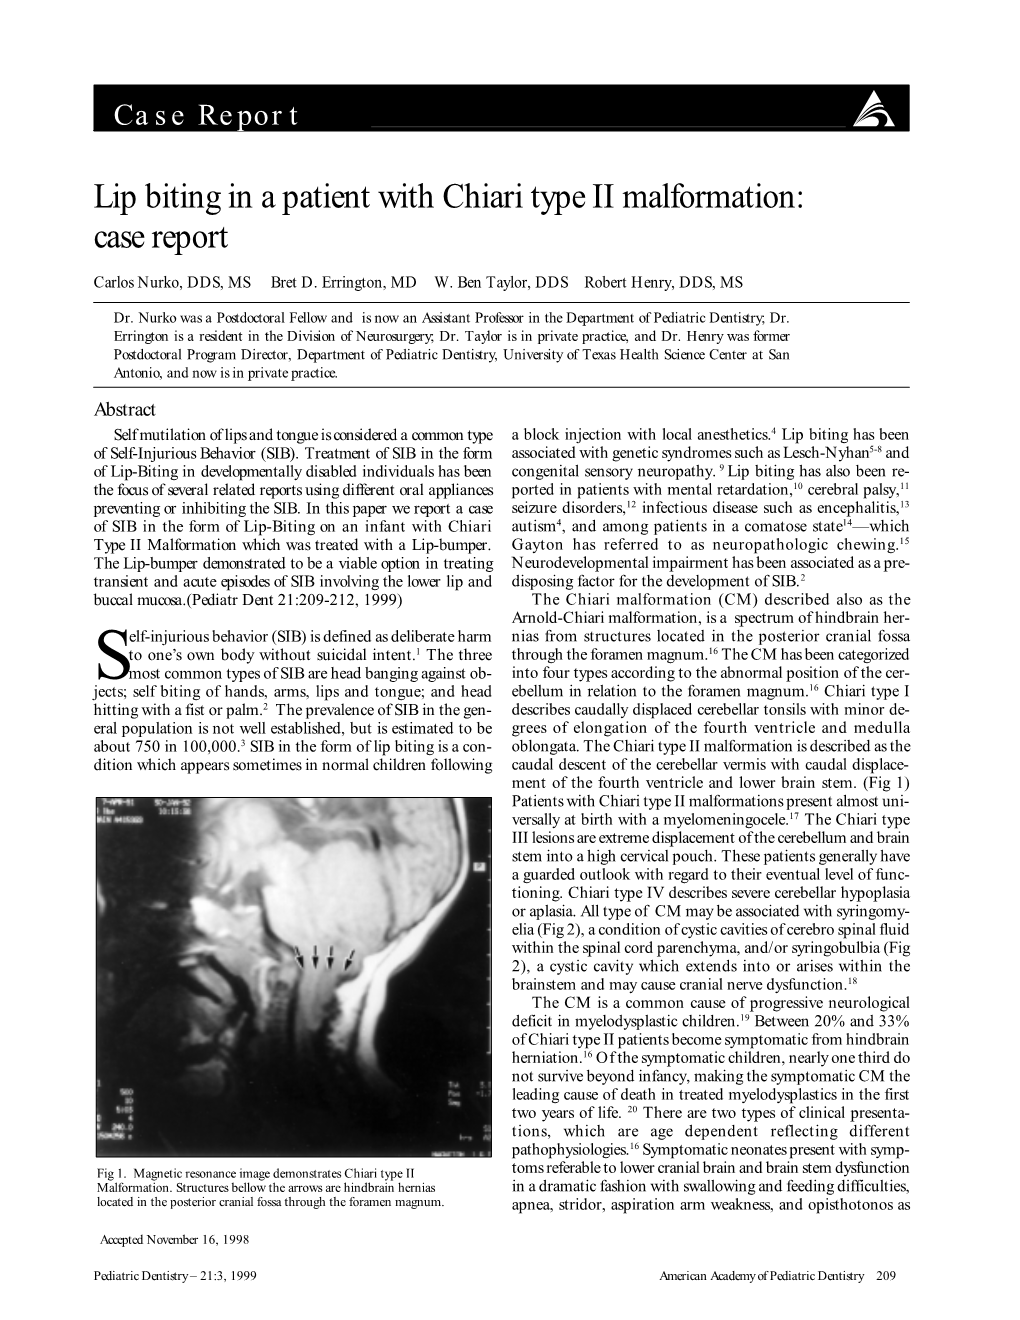 Lip Biting in a Patient with Chiari Type II Malformation: Case Report